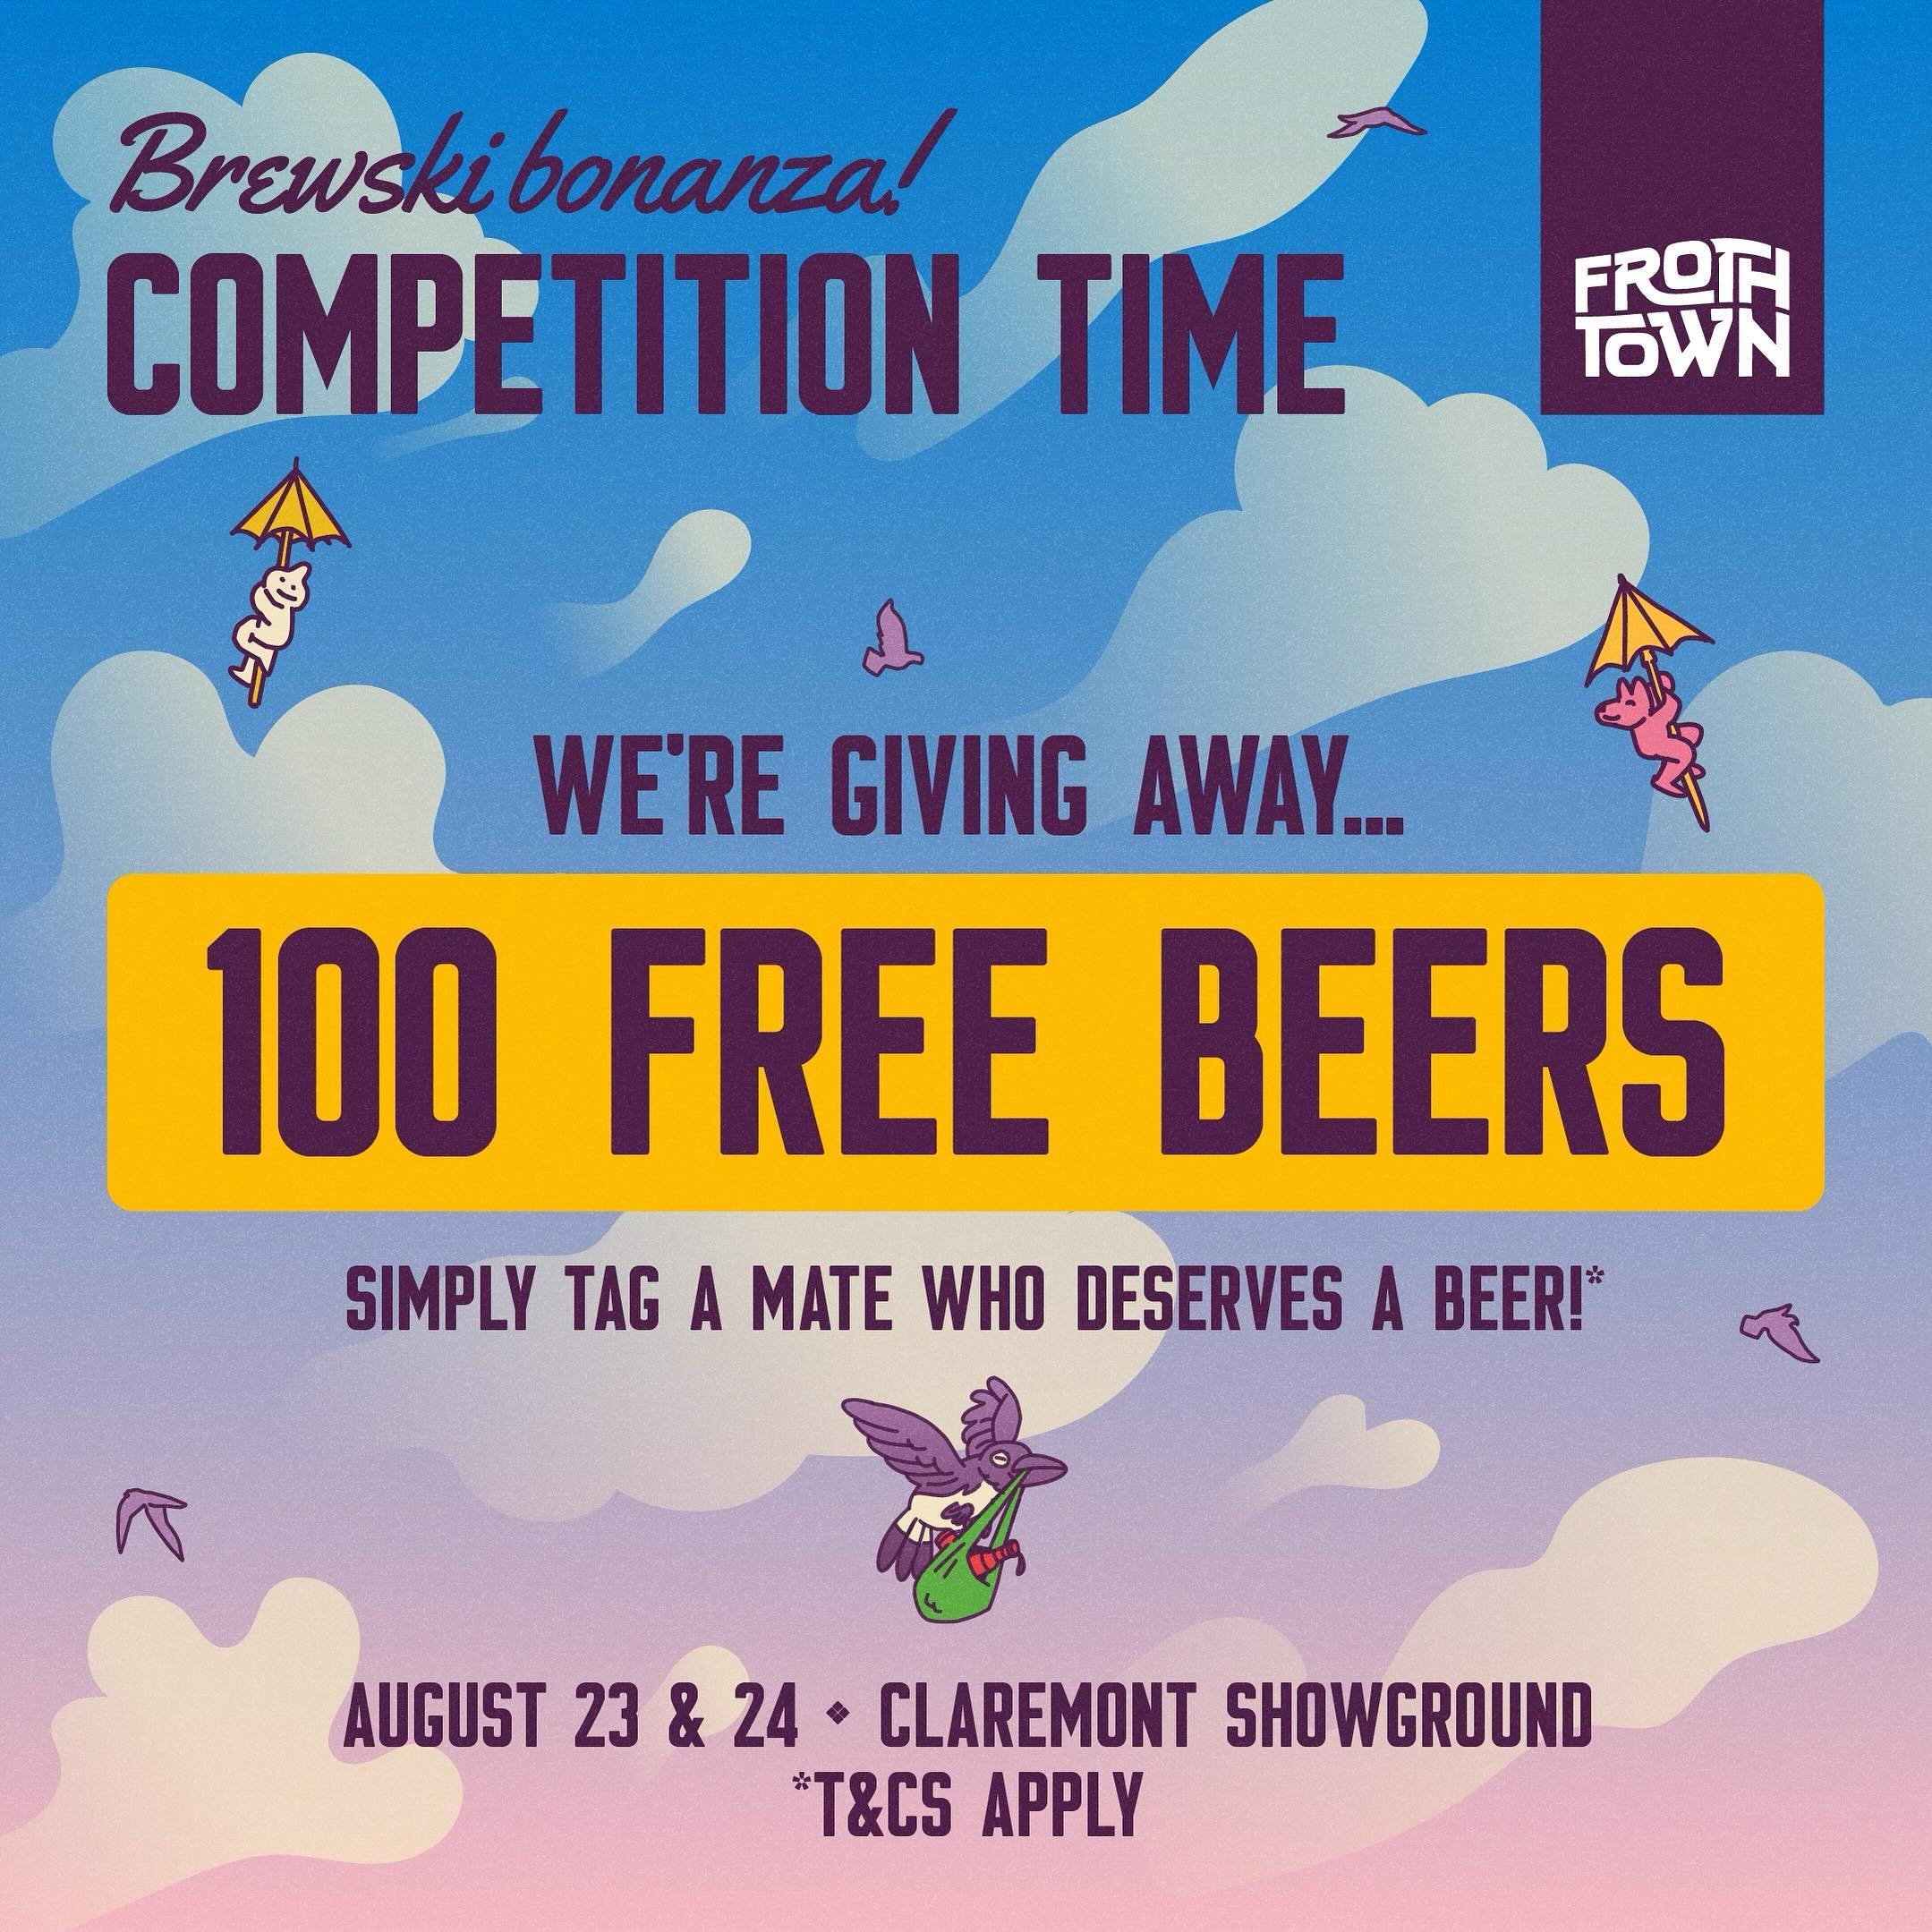 ✨ONLY 100 DAYS TILL FROTH TOWN ✨
 TO CELEBRATE, WE ARE GIVING AWAY 100 FREE BEERS 🍻 
All you have to do is tag a mate who you think deserves a free beer 🍻 Get tagging 👇

Competition closes Wednesday 22nd May at 6pm 🚨
Winners announced Thursday 23